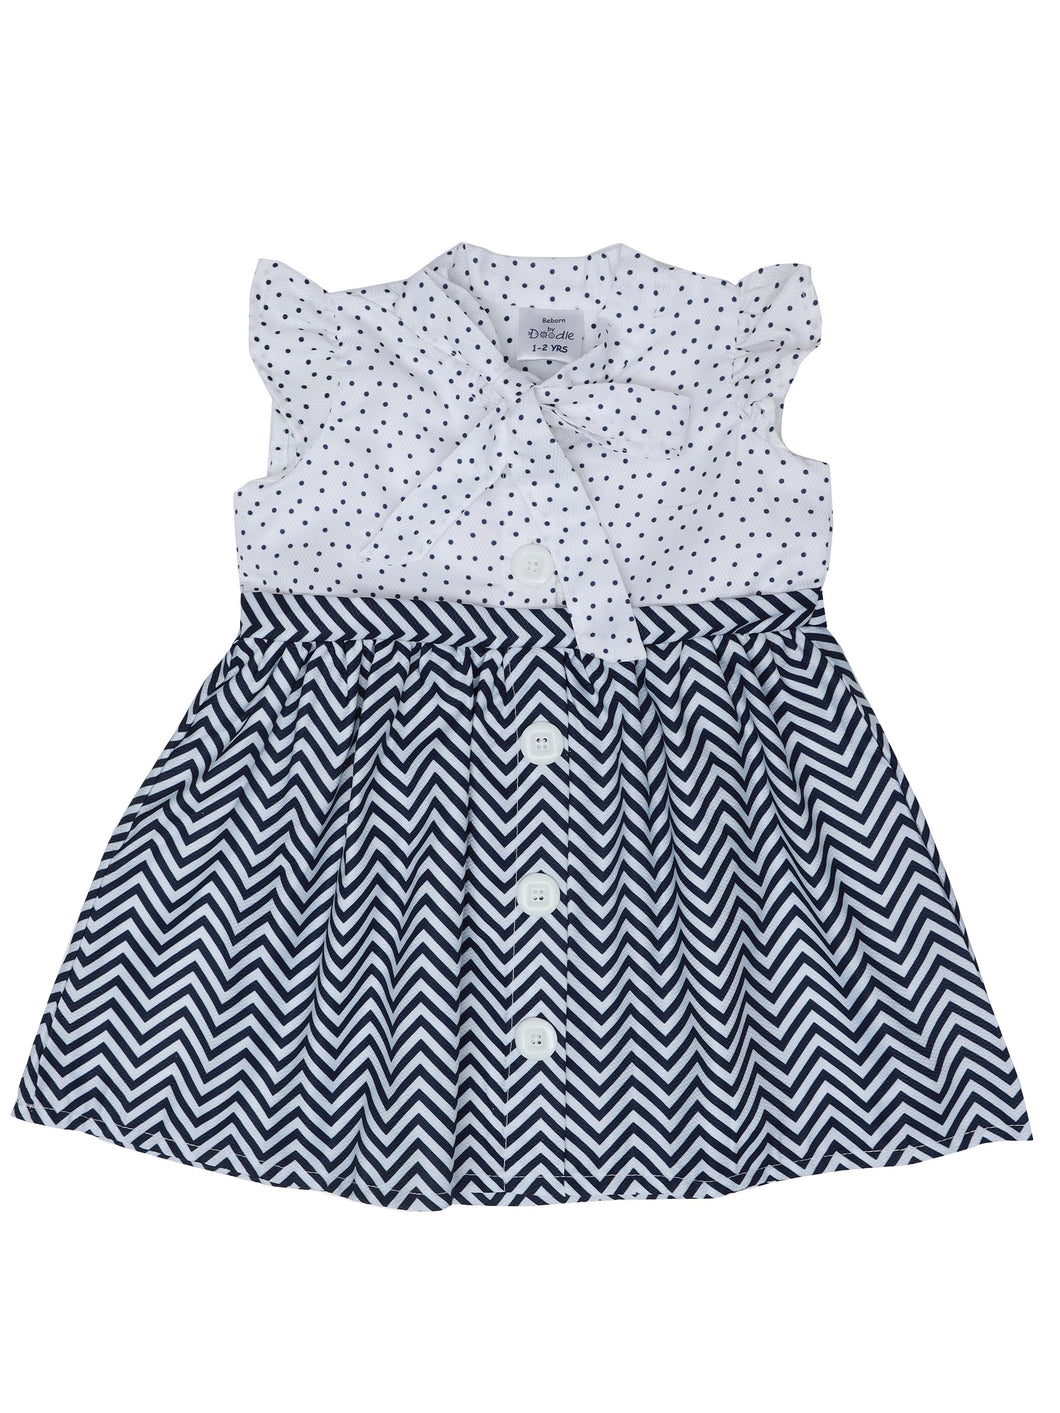 Navy With White Polka and ZIG ZAG Printed Tie up Dress